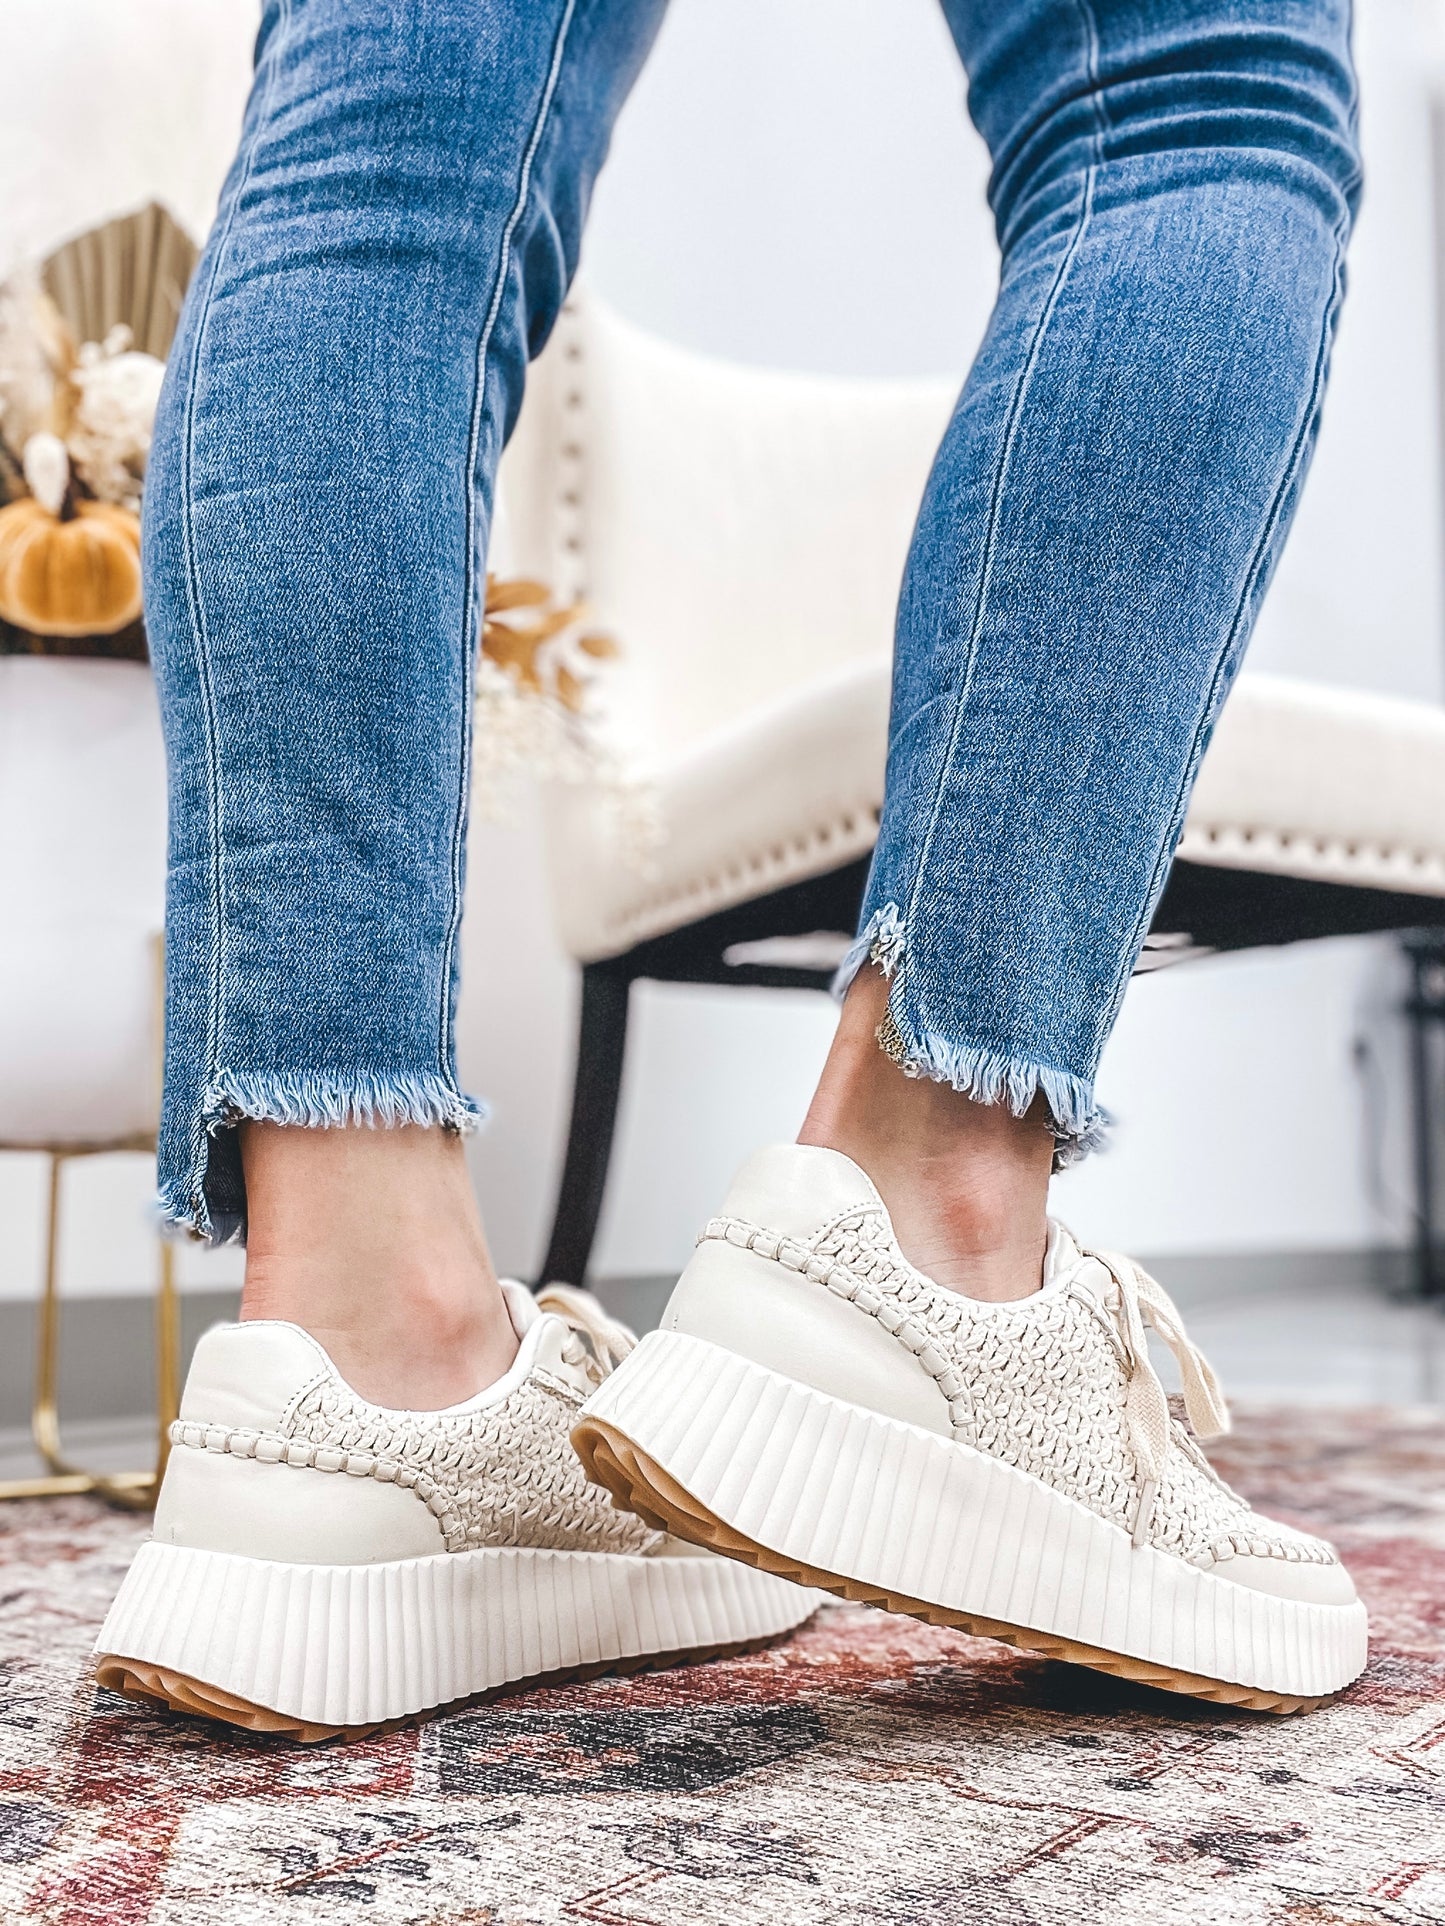 The Selina Woven Sneakers